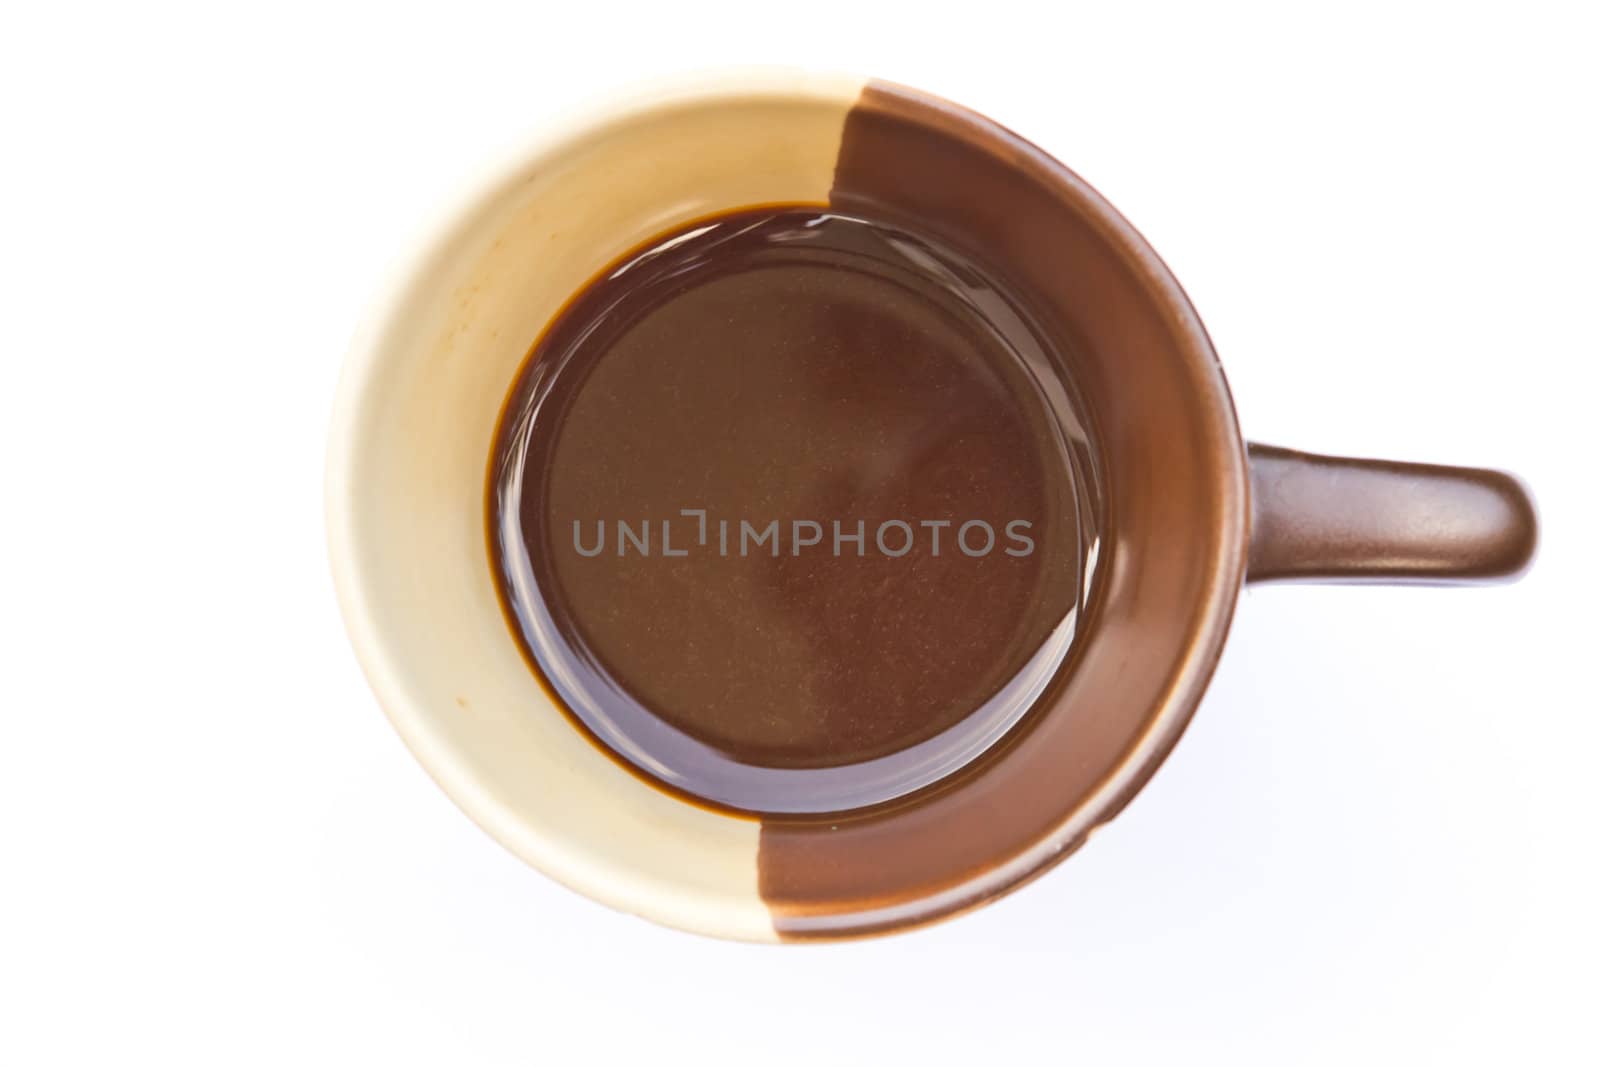 Top view of black coffee cup isolated on white